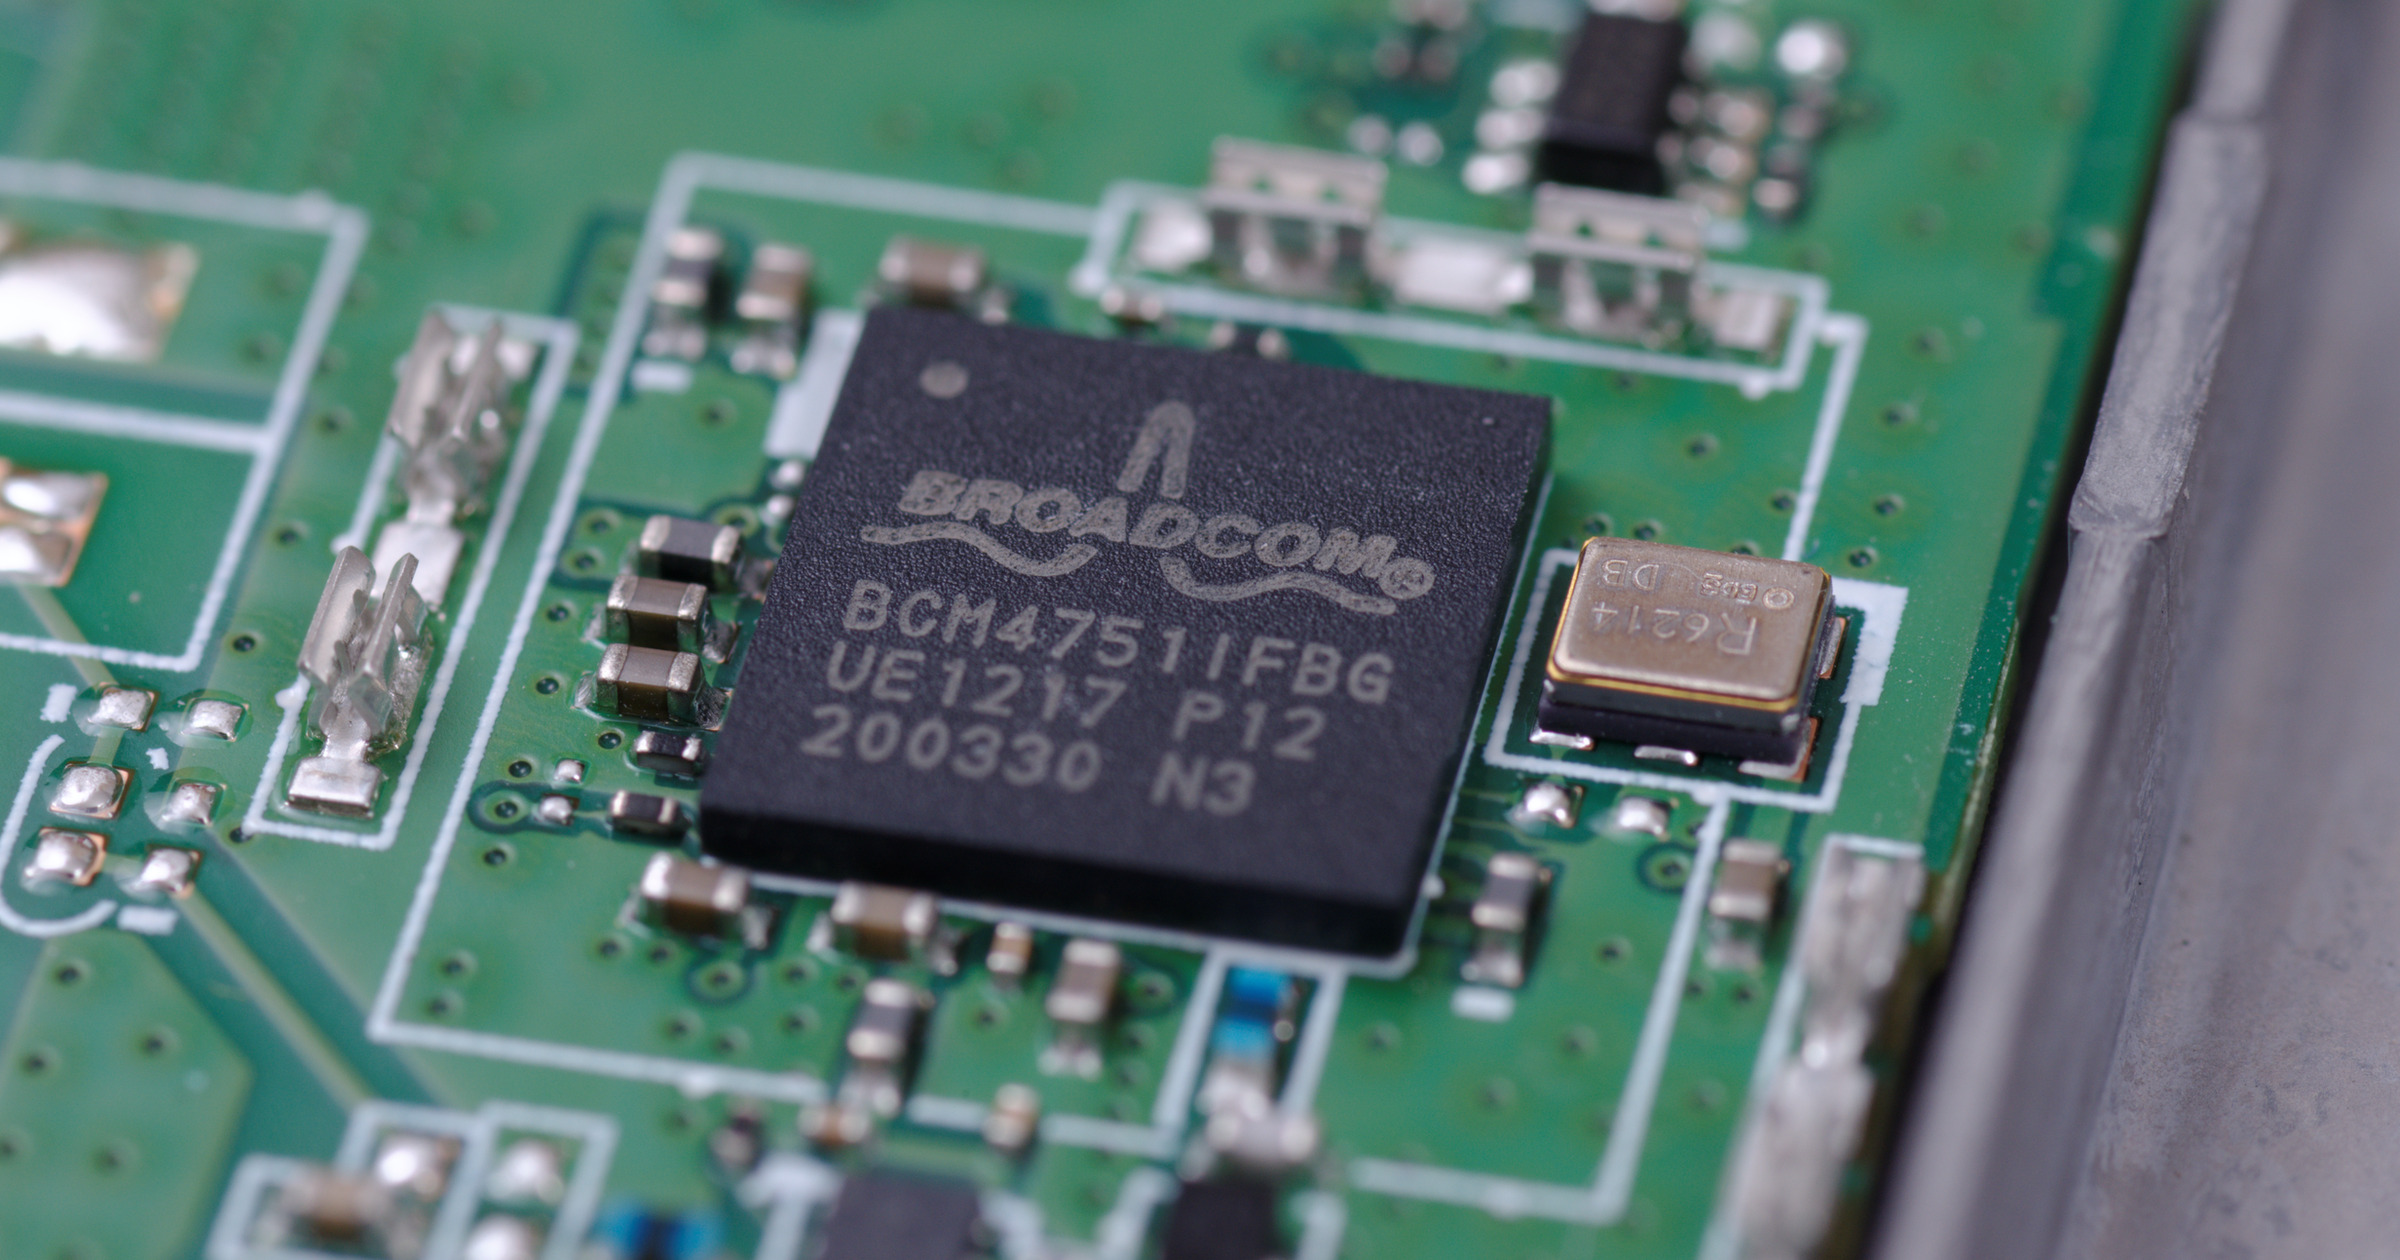 Chip marked Broadcom on a circuit board